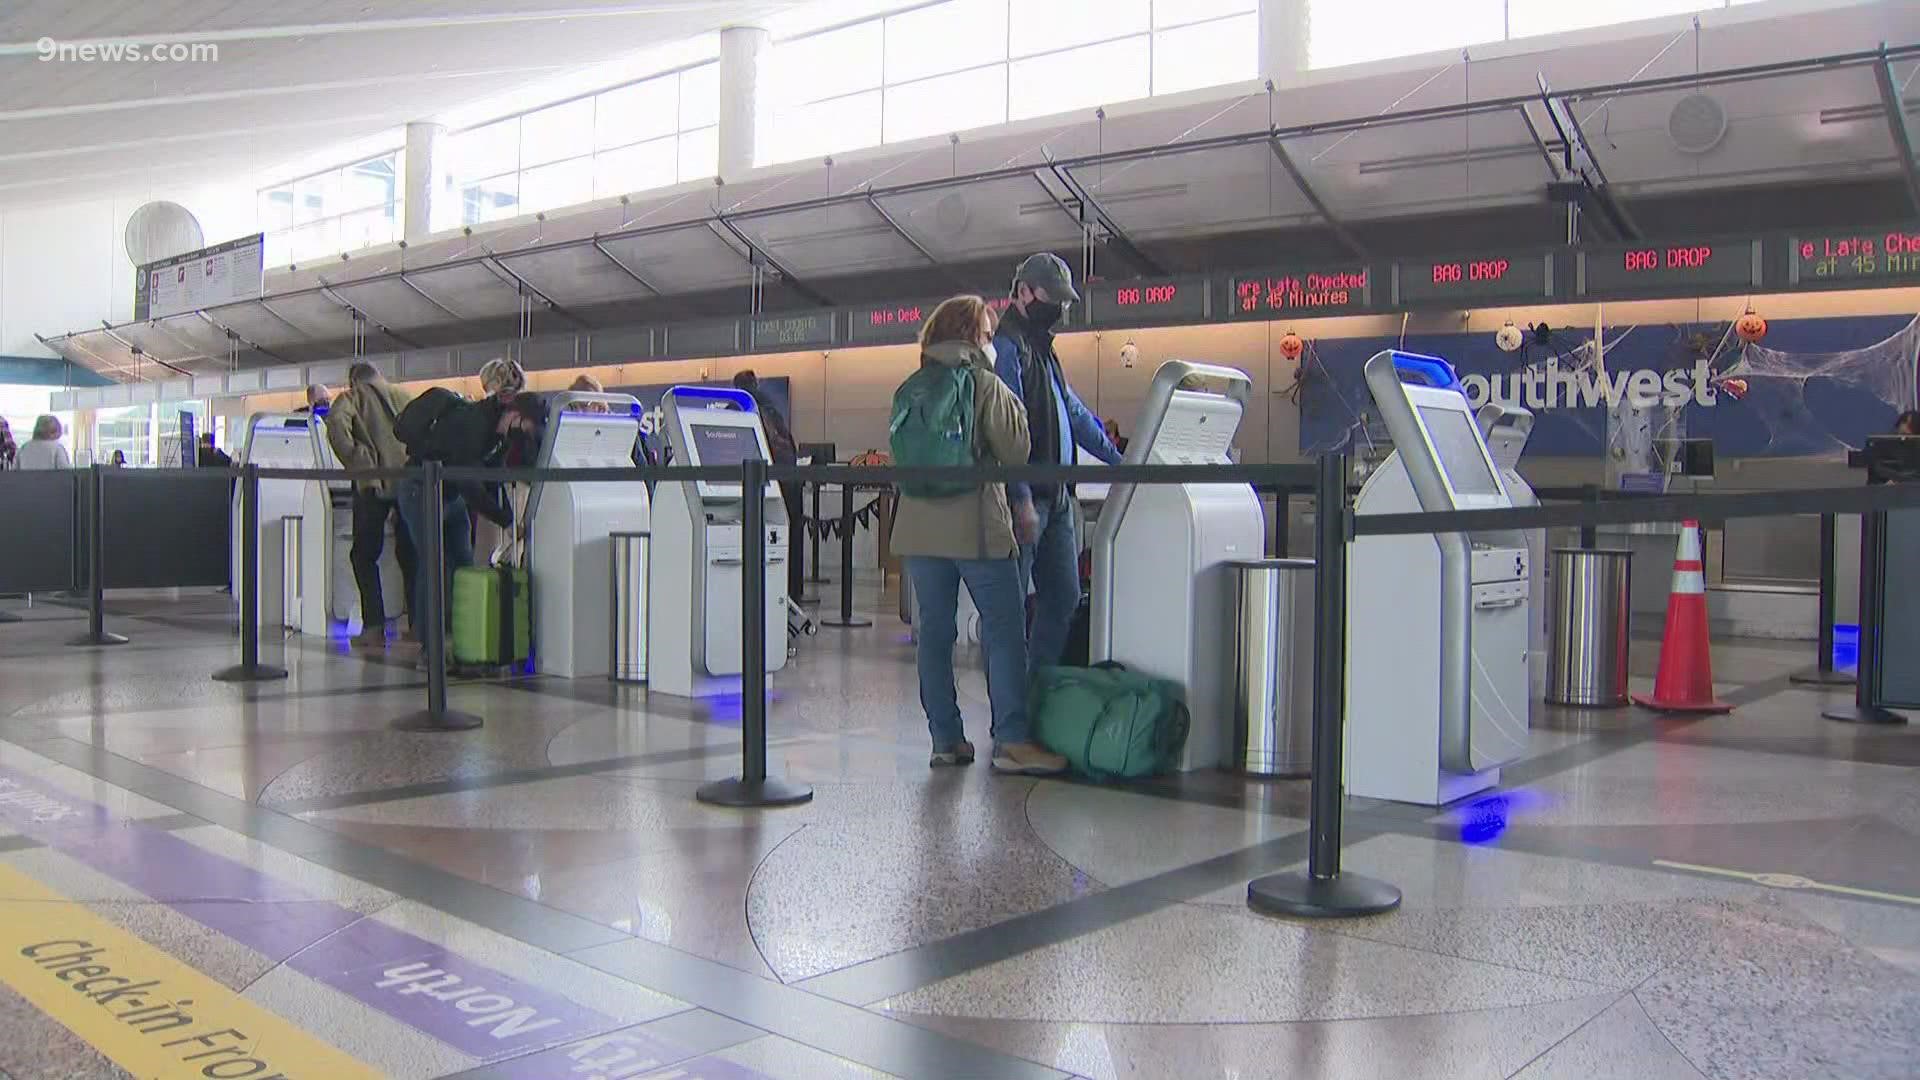 Things are calmer at Denver International Airport Monday, but it could take several more days before the chain reaction levels out.